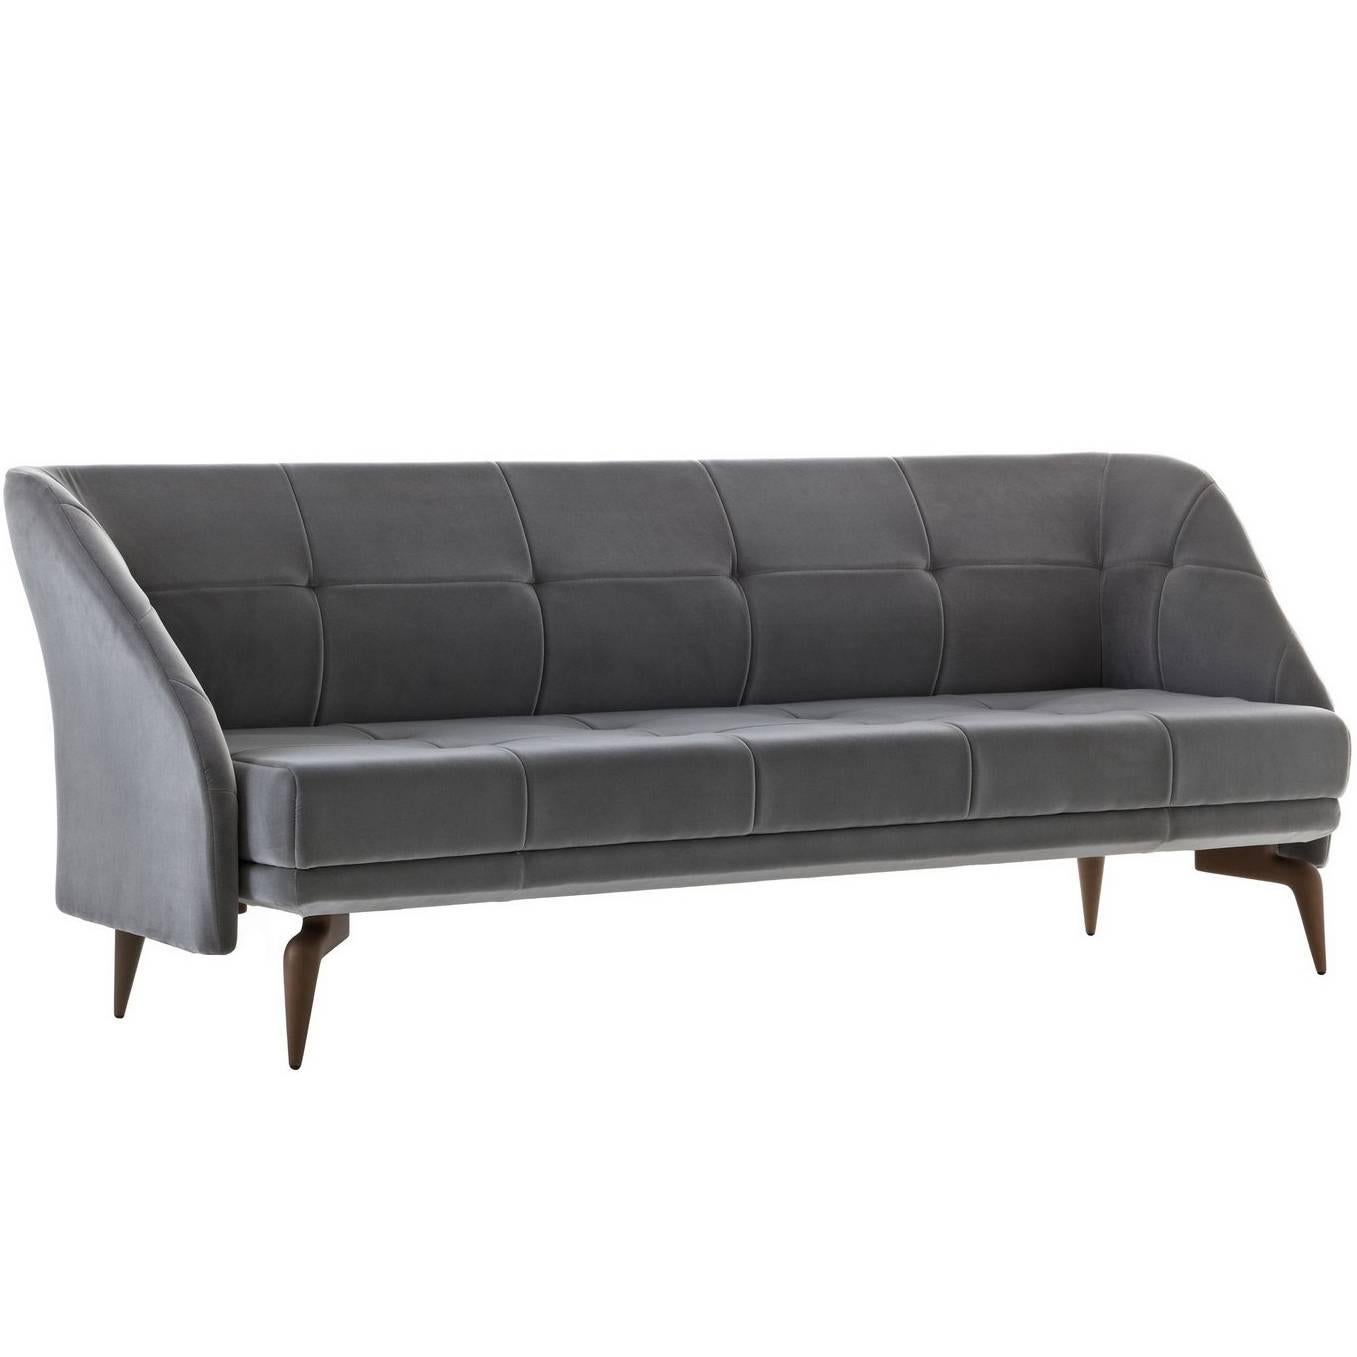 "Leeon" Three-Seat Velvet Covered Sofa Designed by L. and R. Palomba for Driade For Sale